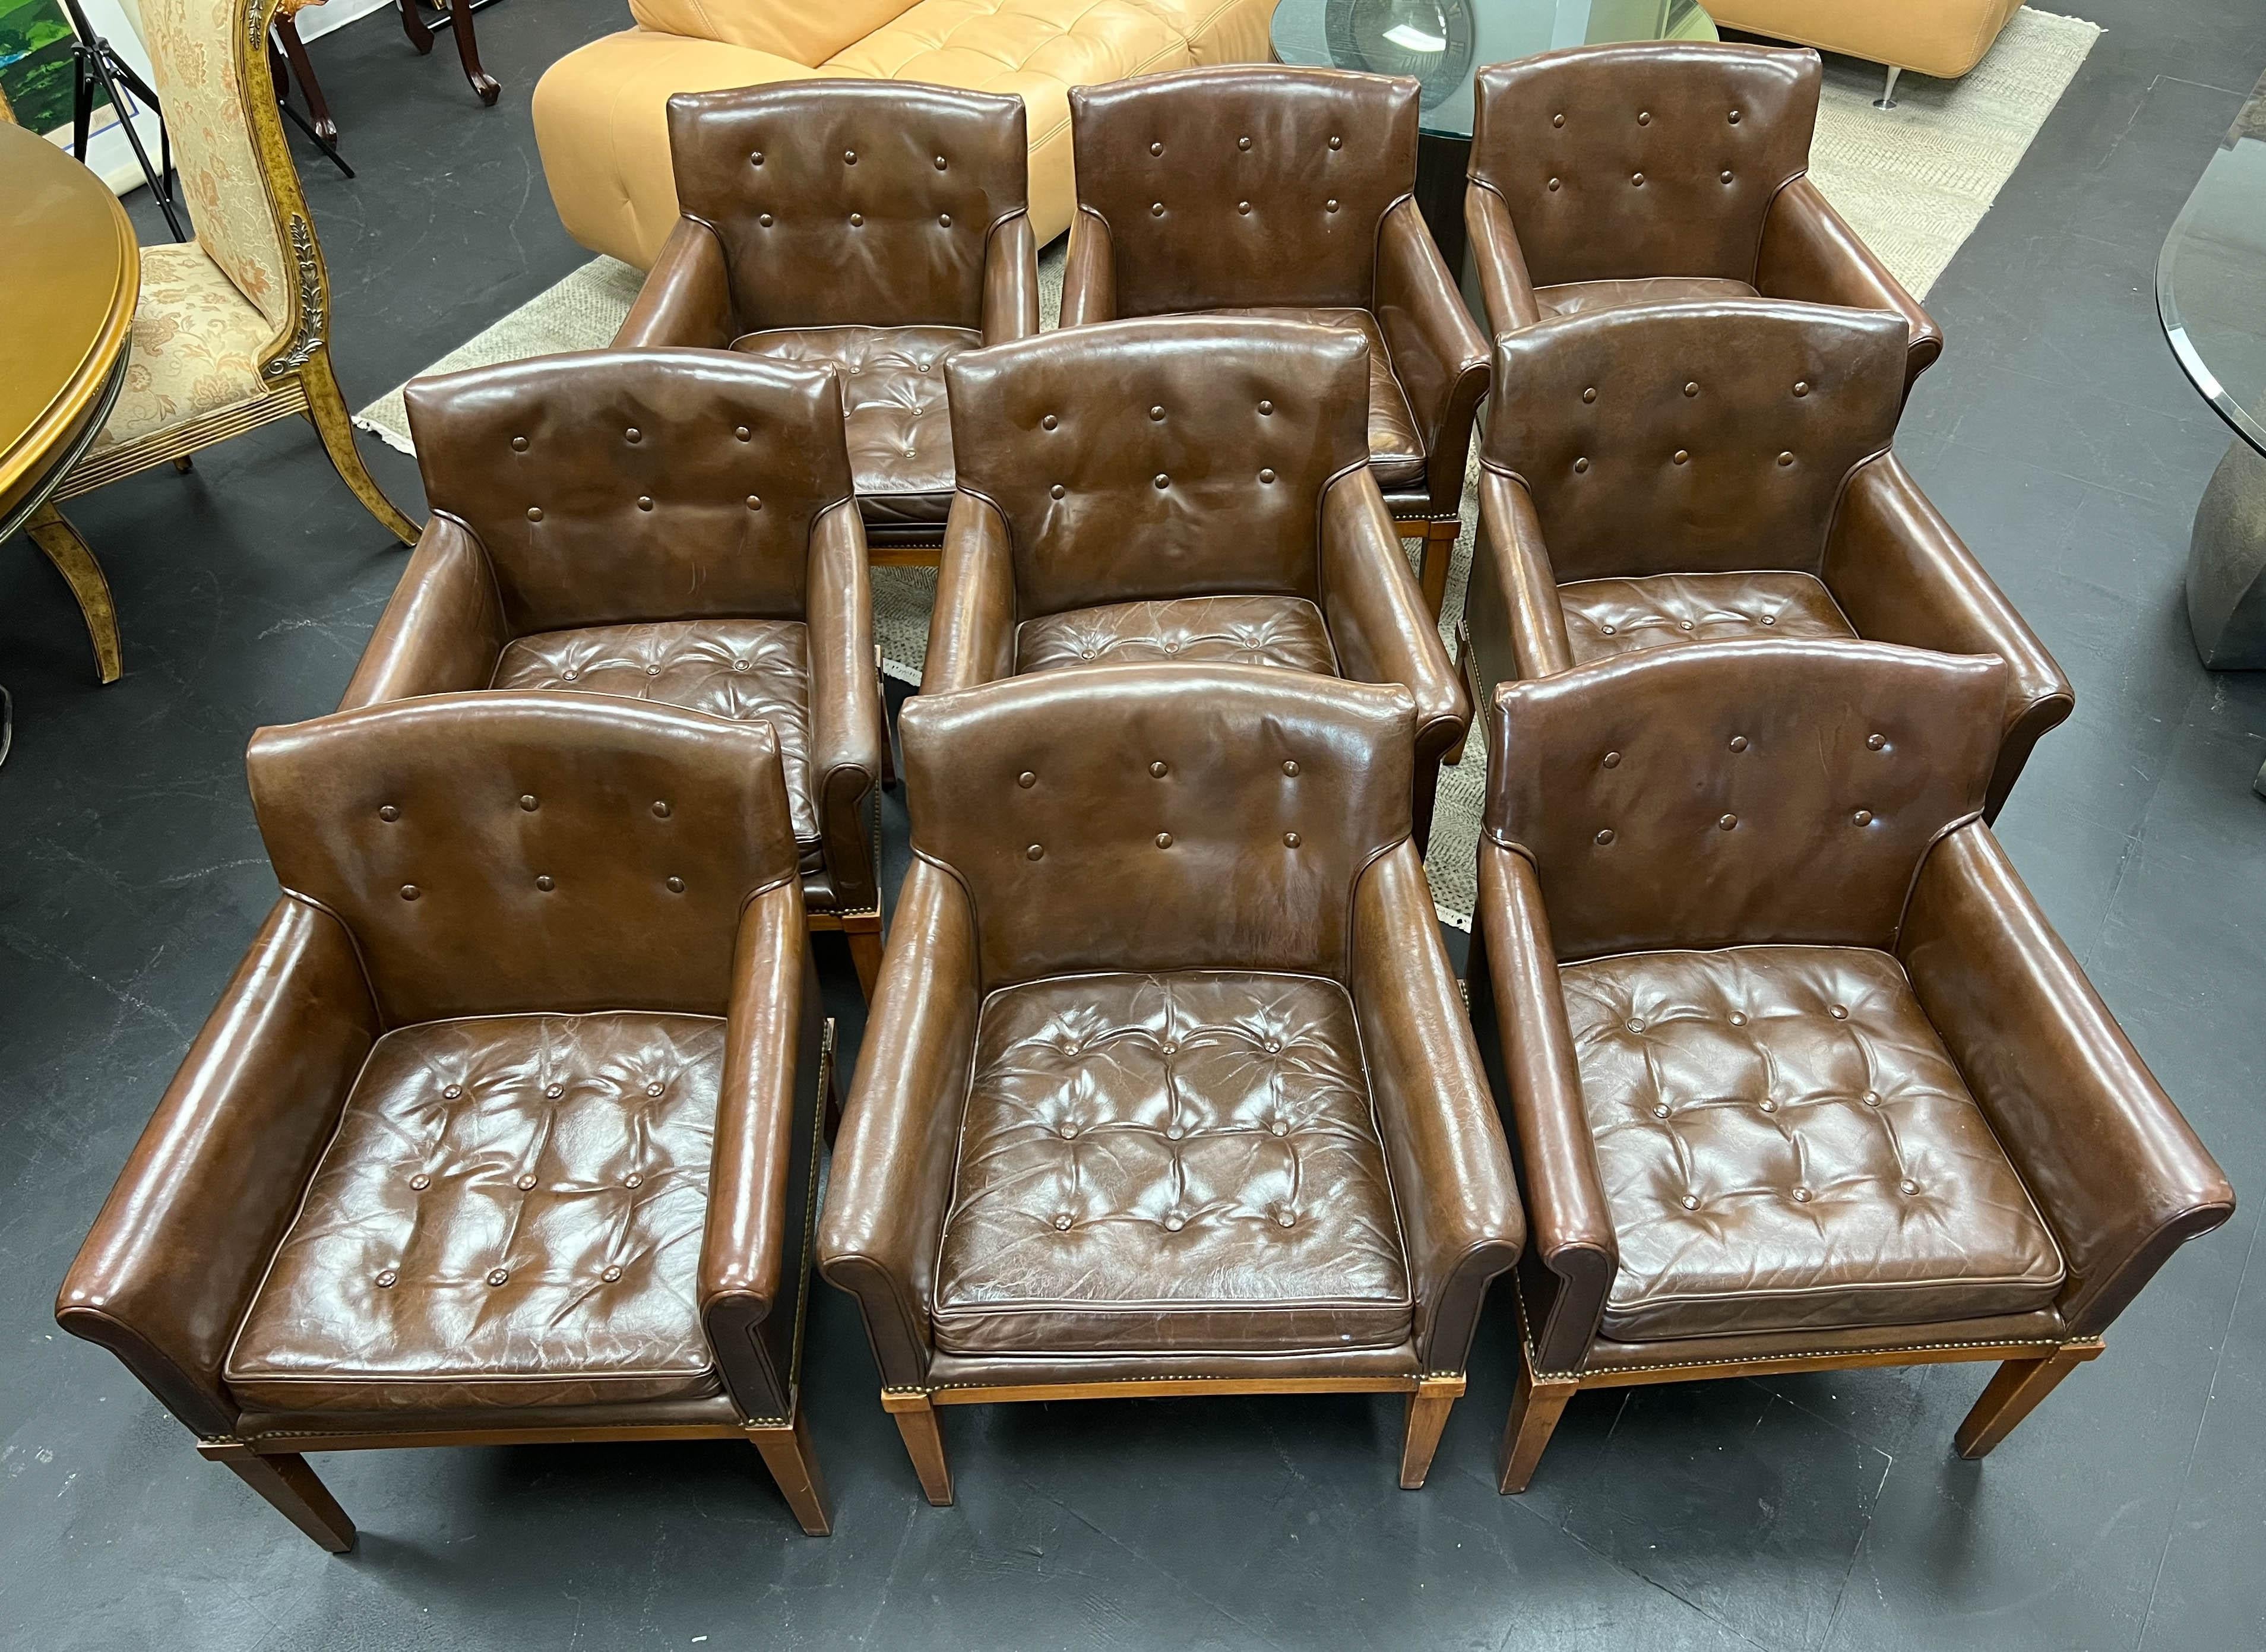 Set of nine brown leather armchairs by Ralph Morse Furniture Company in Grand Rapids, Michigan, made in 1969. Worn beautifully, the chairs are comfortable and the perfect size and scale in a living room or office/library around a conference table,